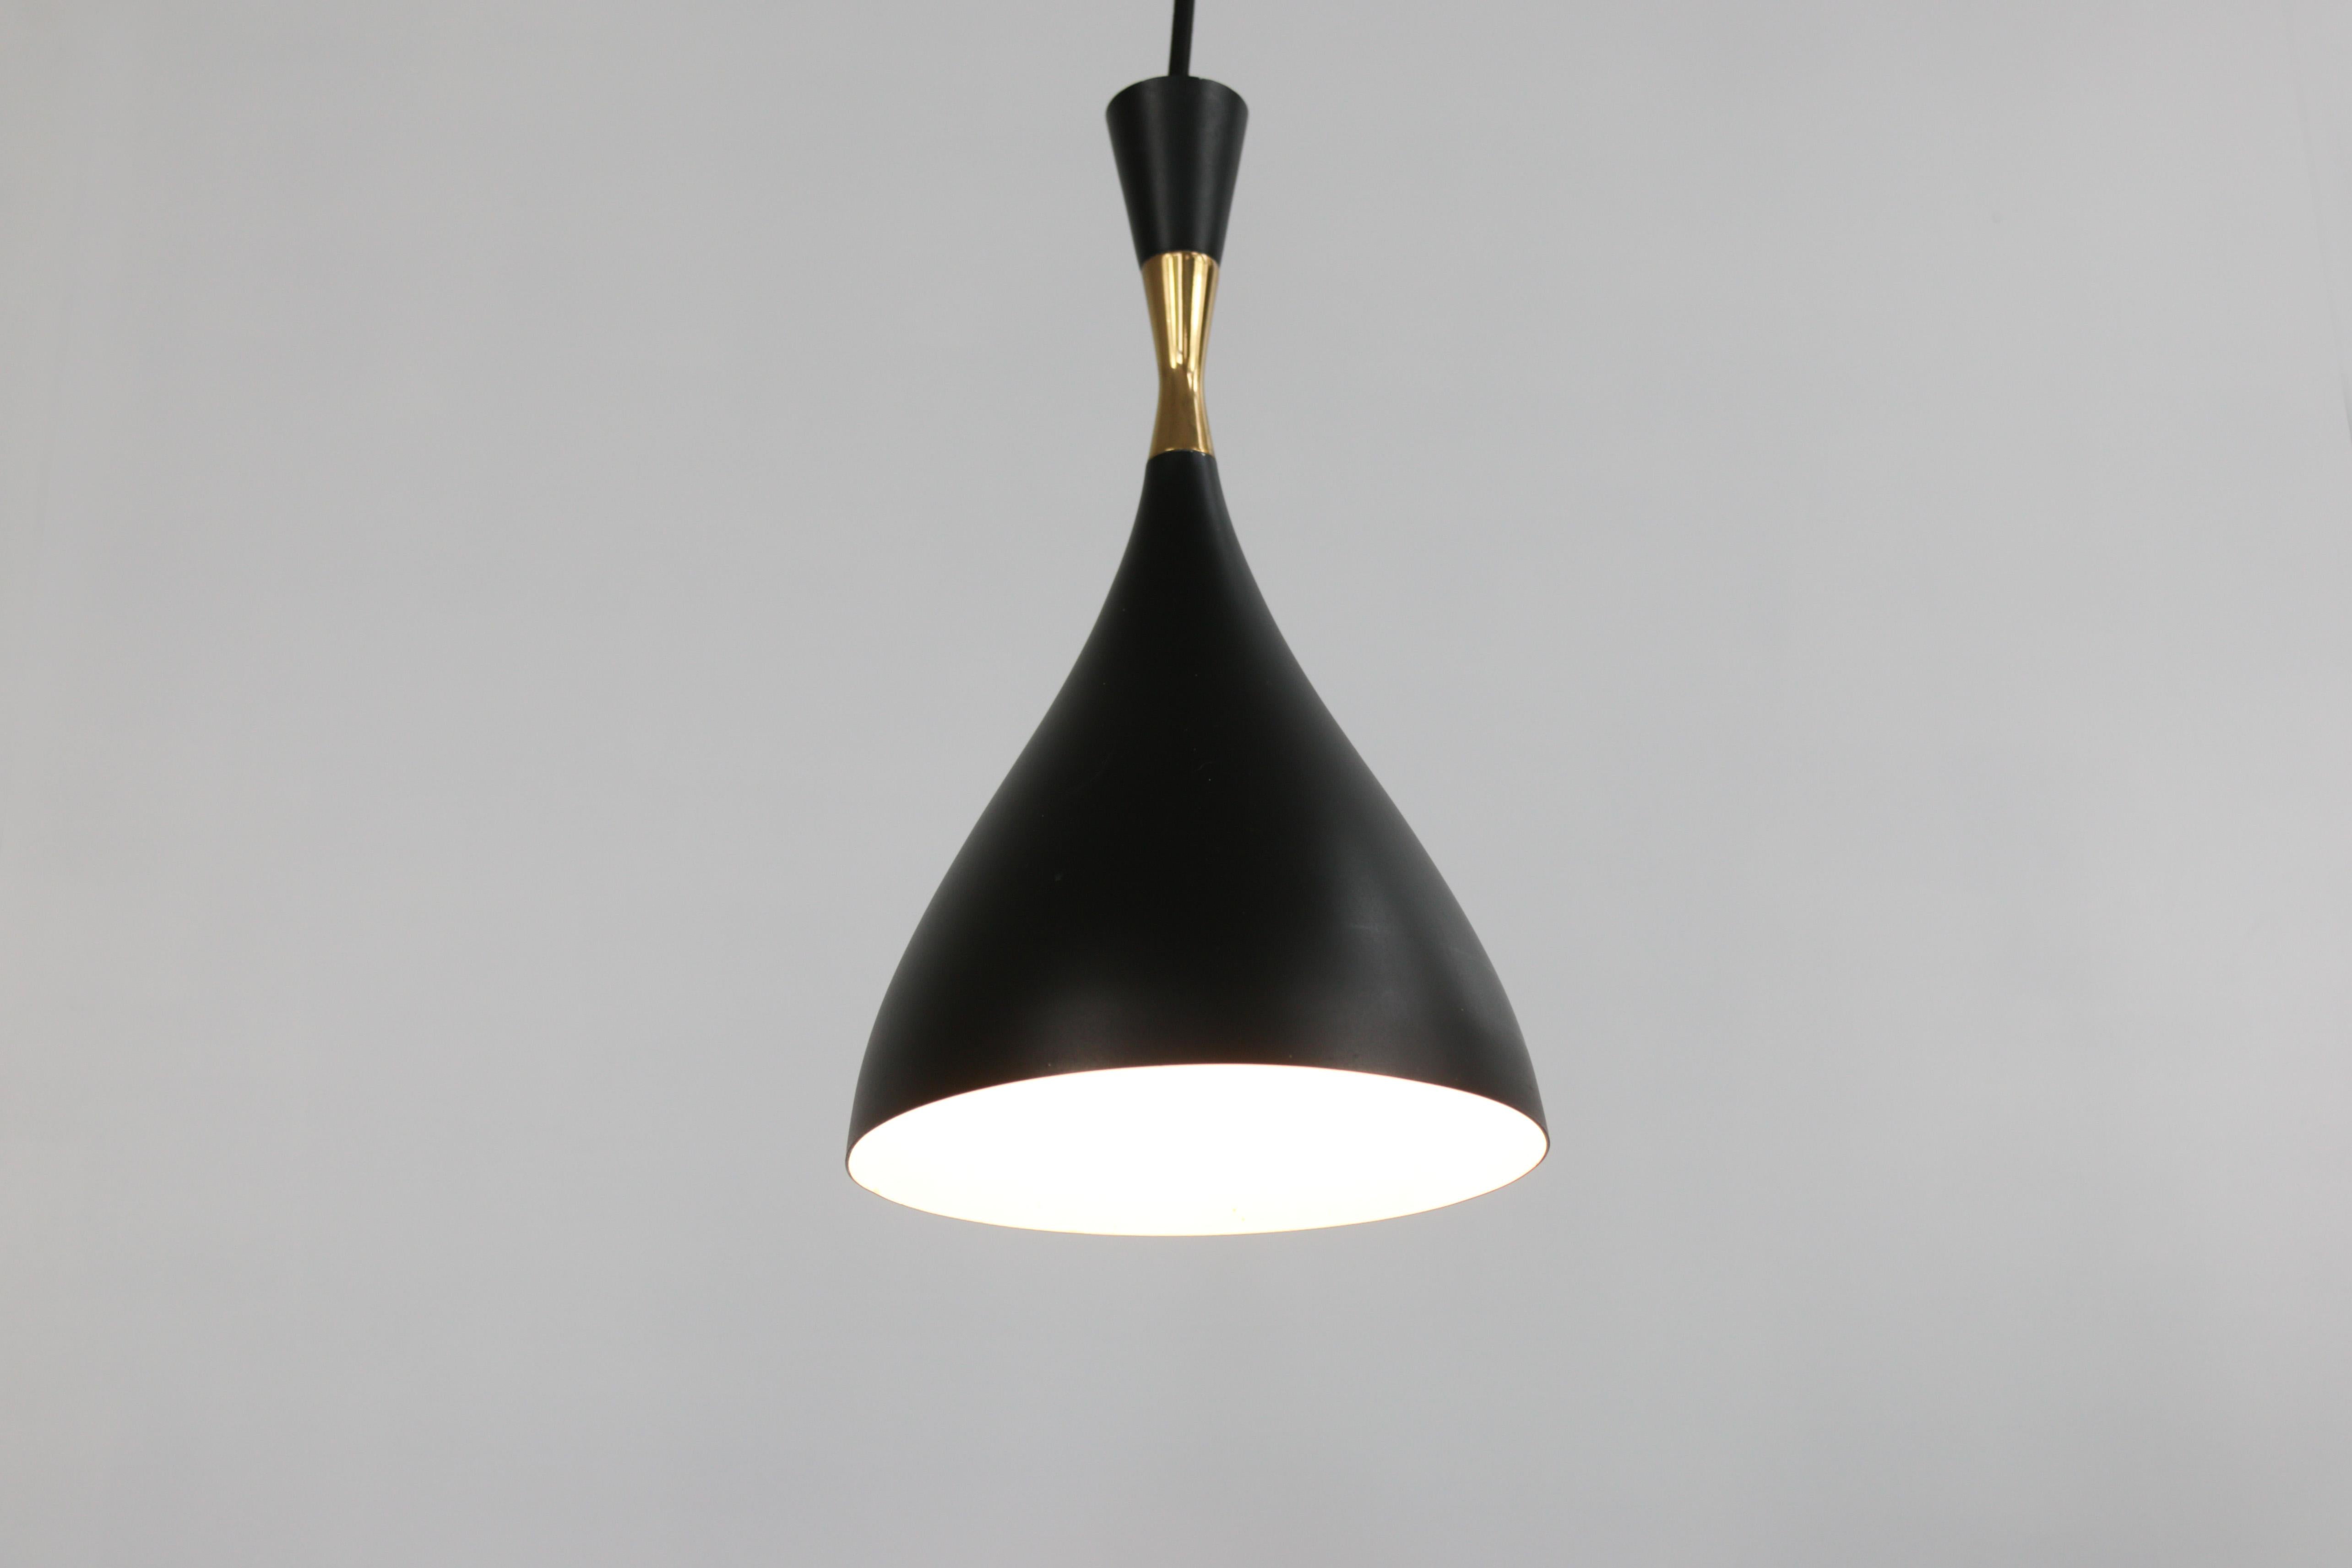 Diavolo Pendant Lamp by Svend Aage Holm Sorensen for Holm Sorensen & Co In Good Condition For Sale In Kiel, SH